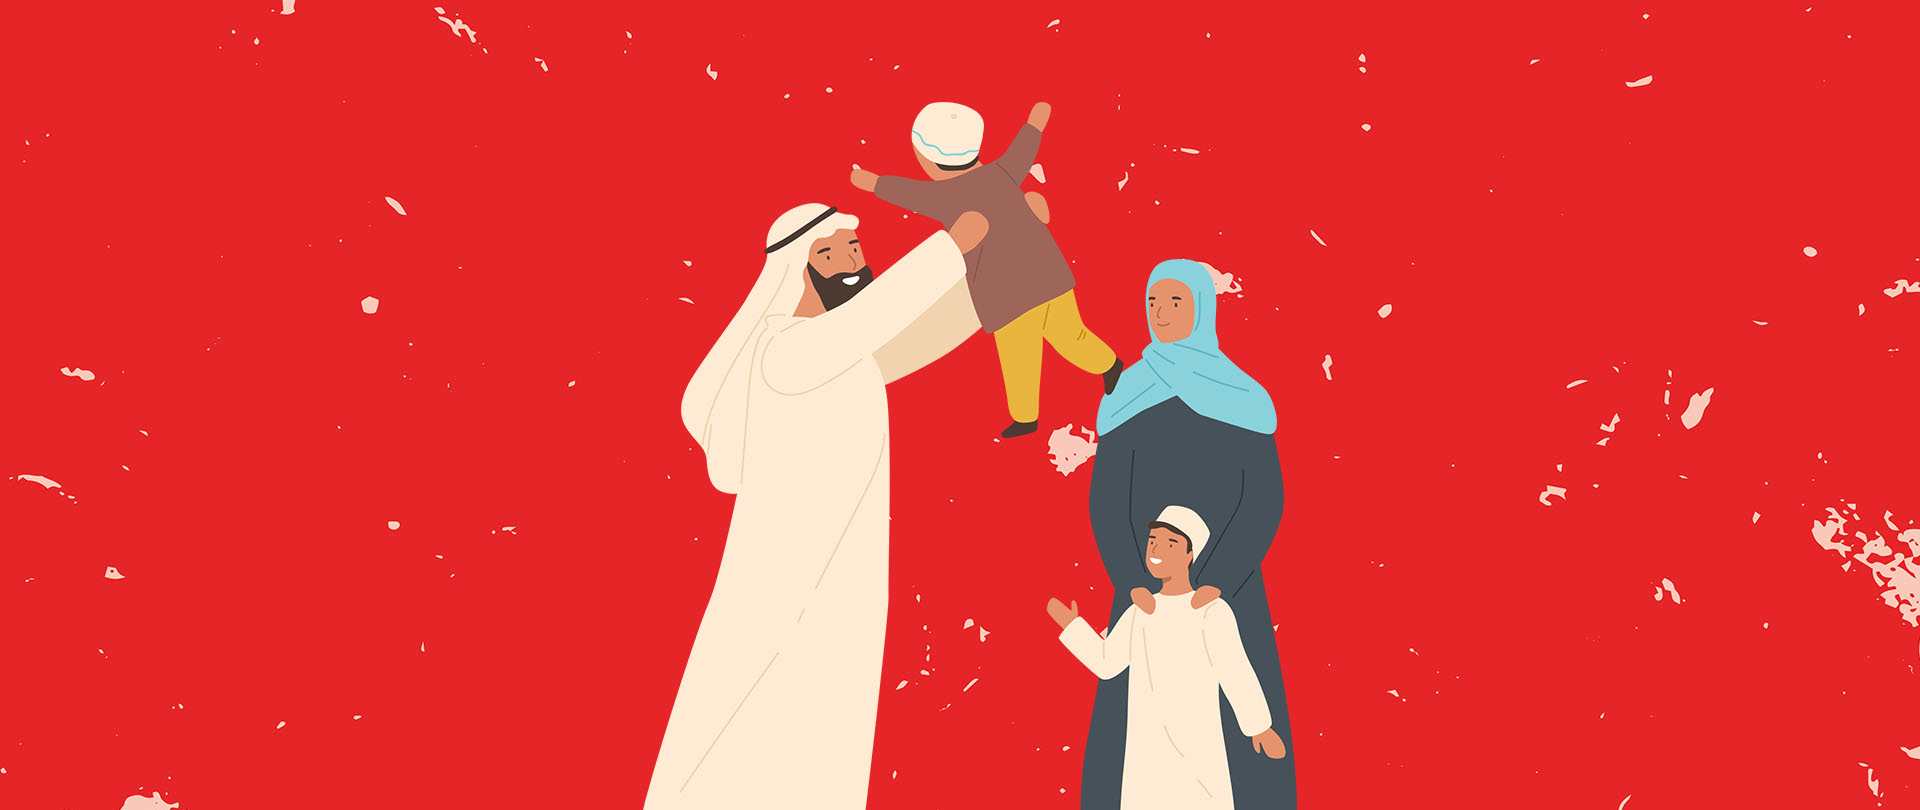 A family smiling while a father lifts a child into the air illustration